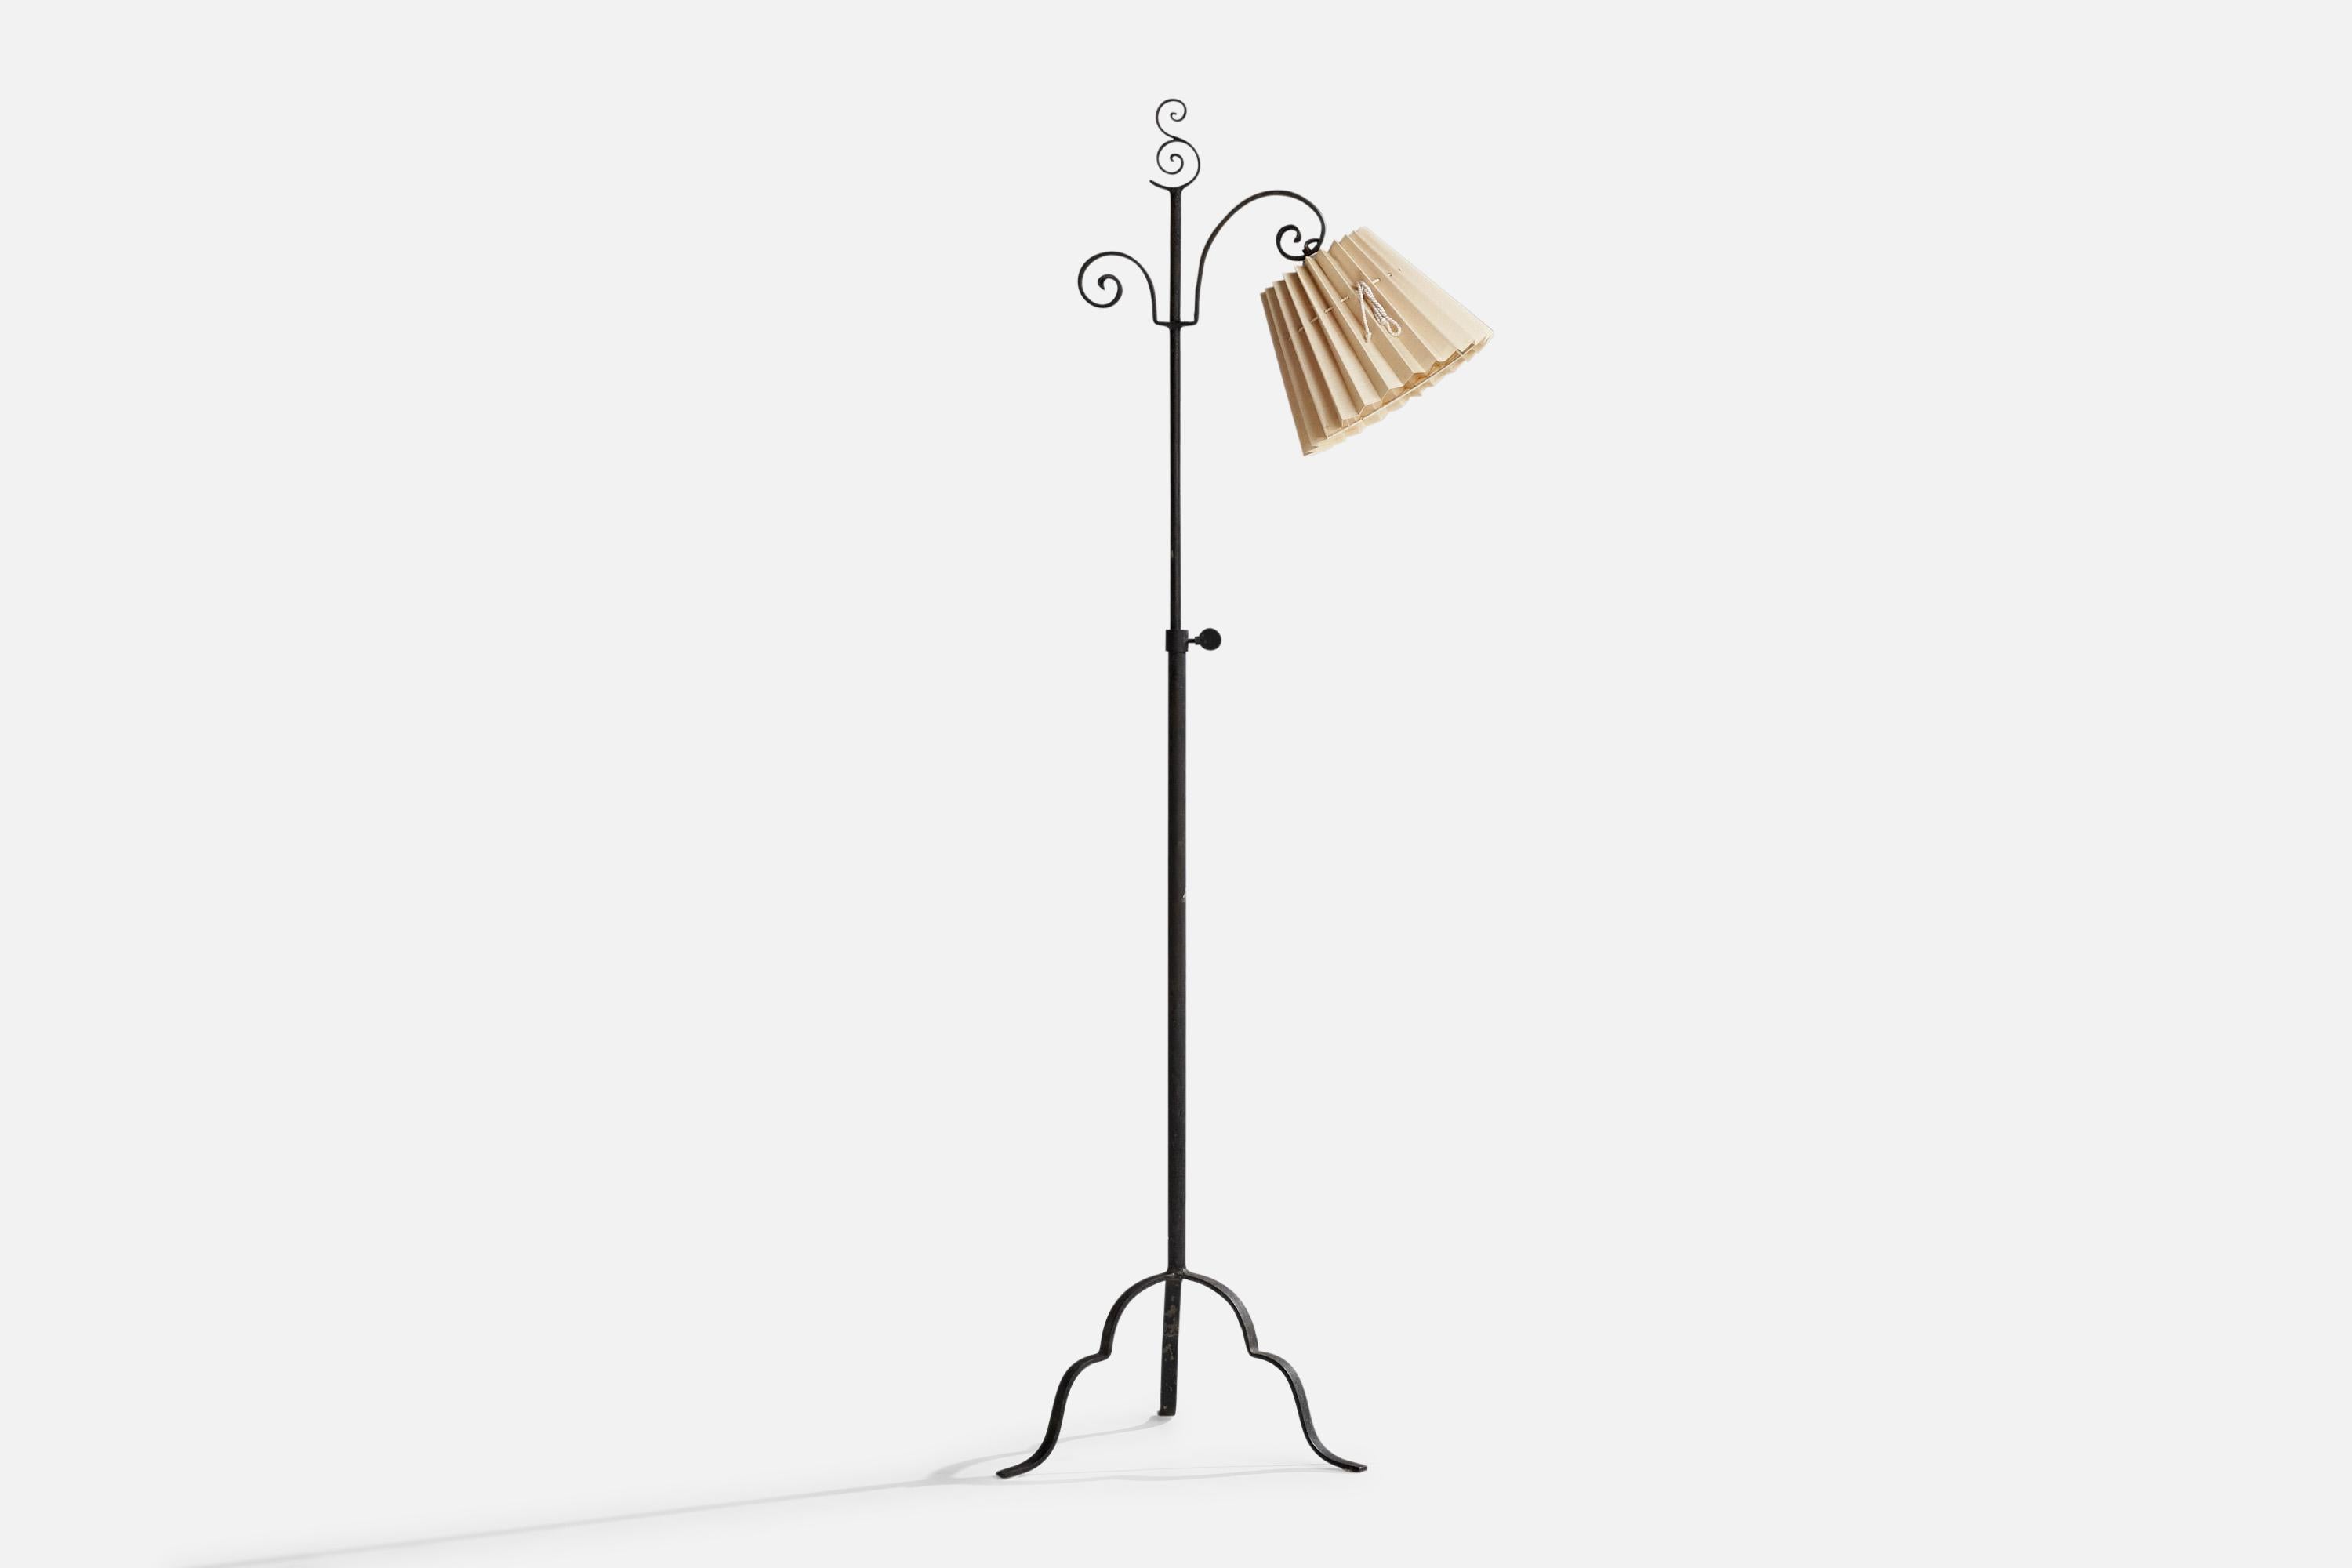 An adjustable wrought iron and beige fabric floor lamp, Model 15101, designed by Harald Notini and produced by Böhlmarks, Sweden, 1930s.

Overall Dimensions (inches): 60.5”  H x 16”  W x 23” D
Stated dimensions include shade.
Bulb Specifications: